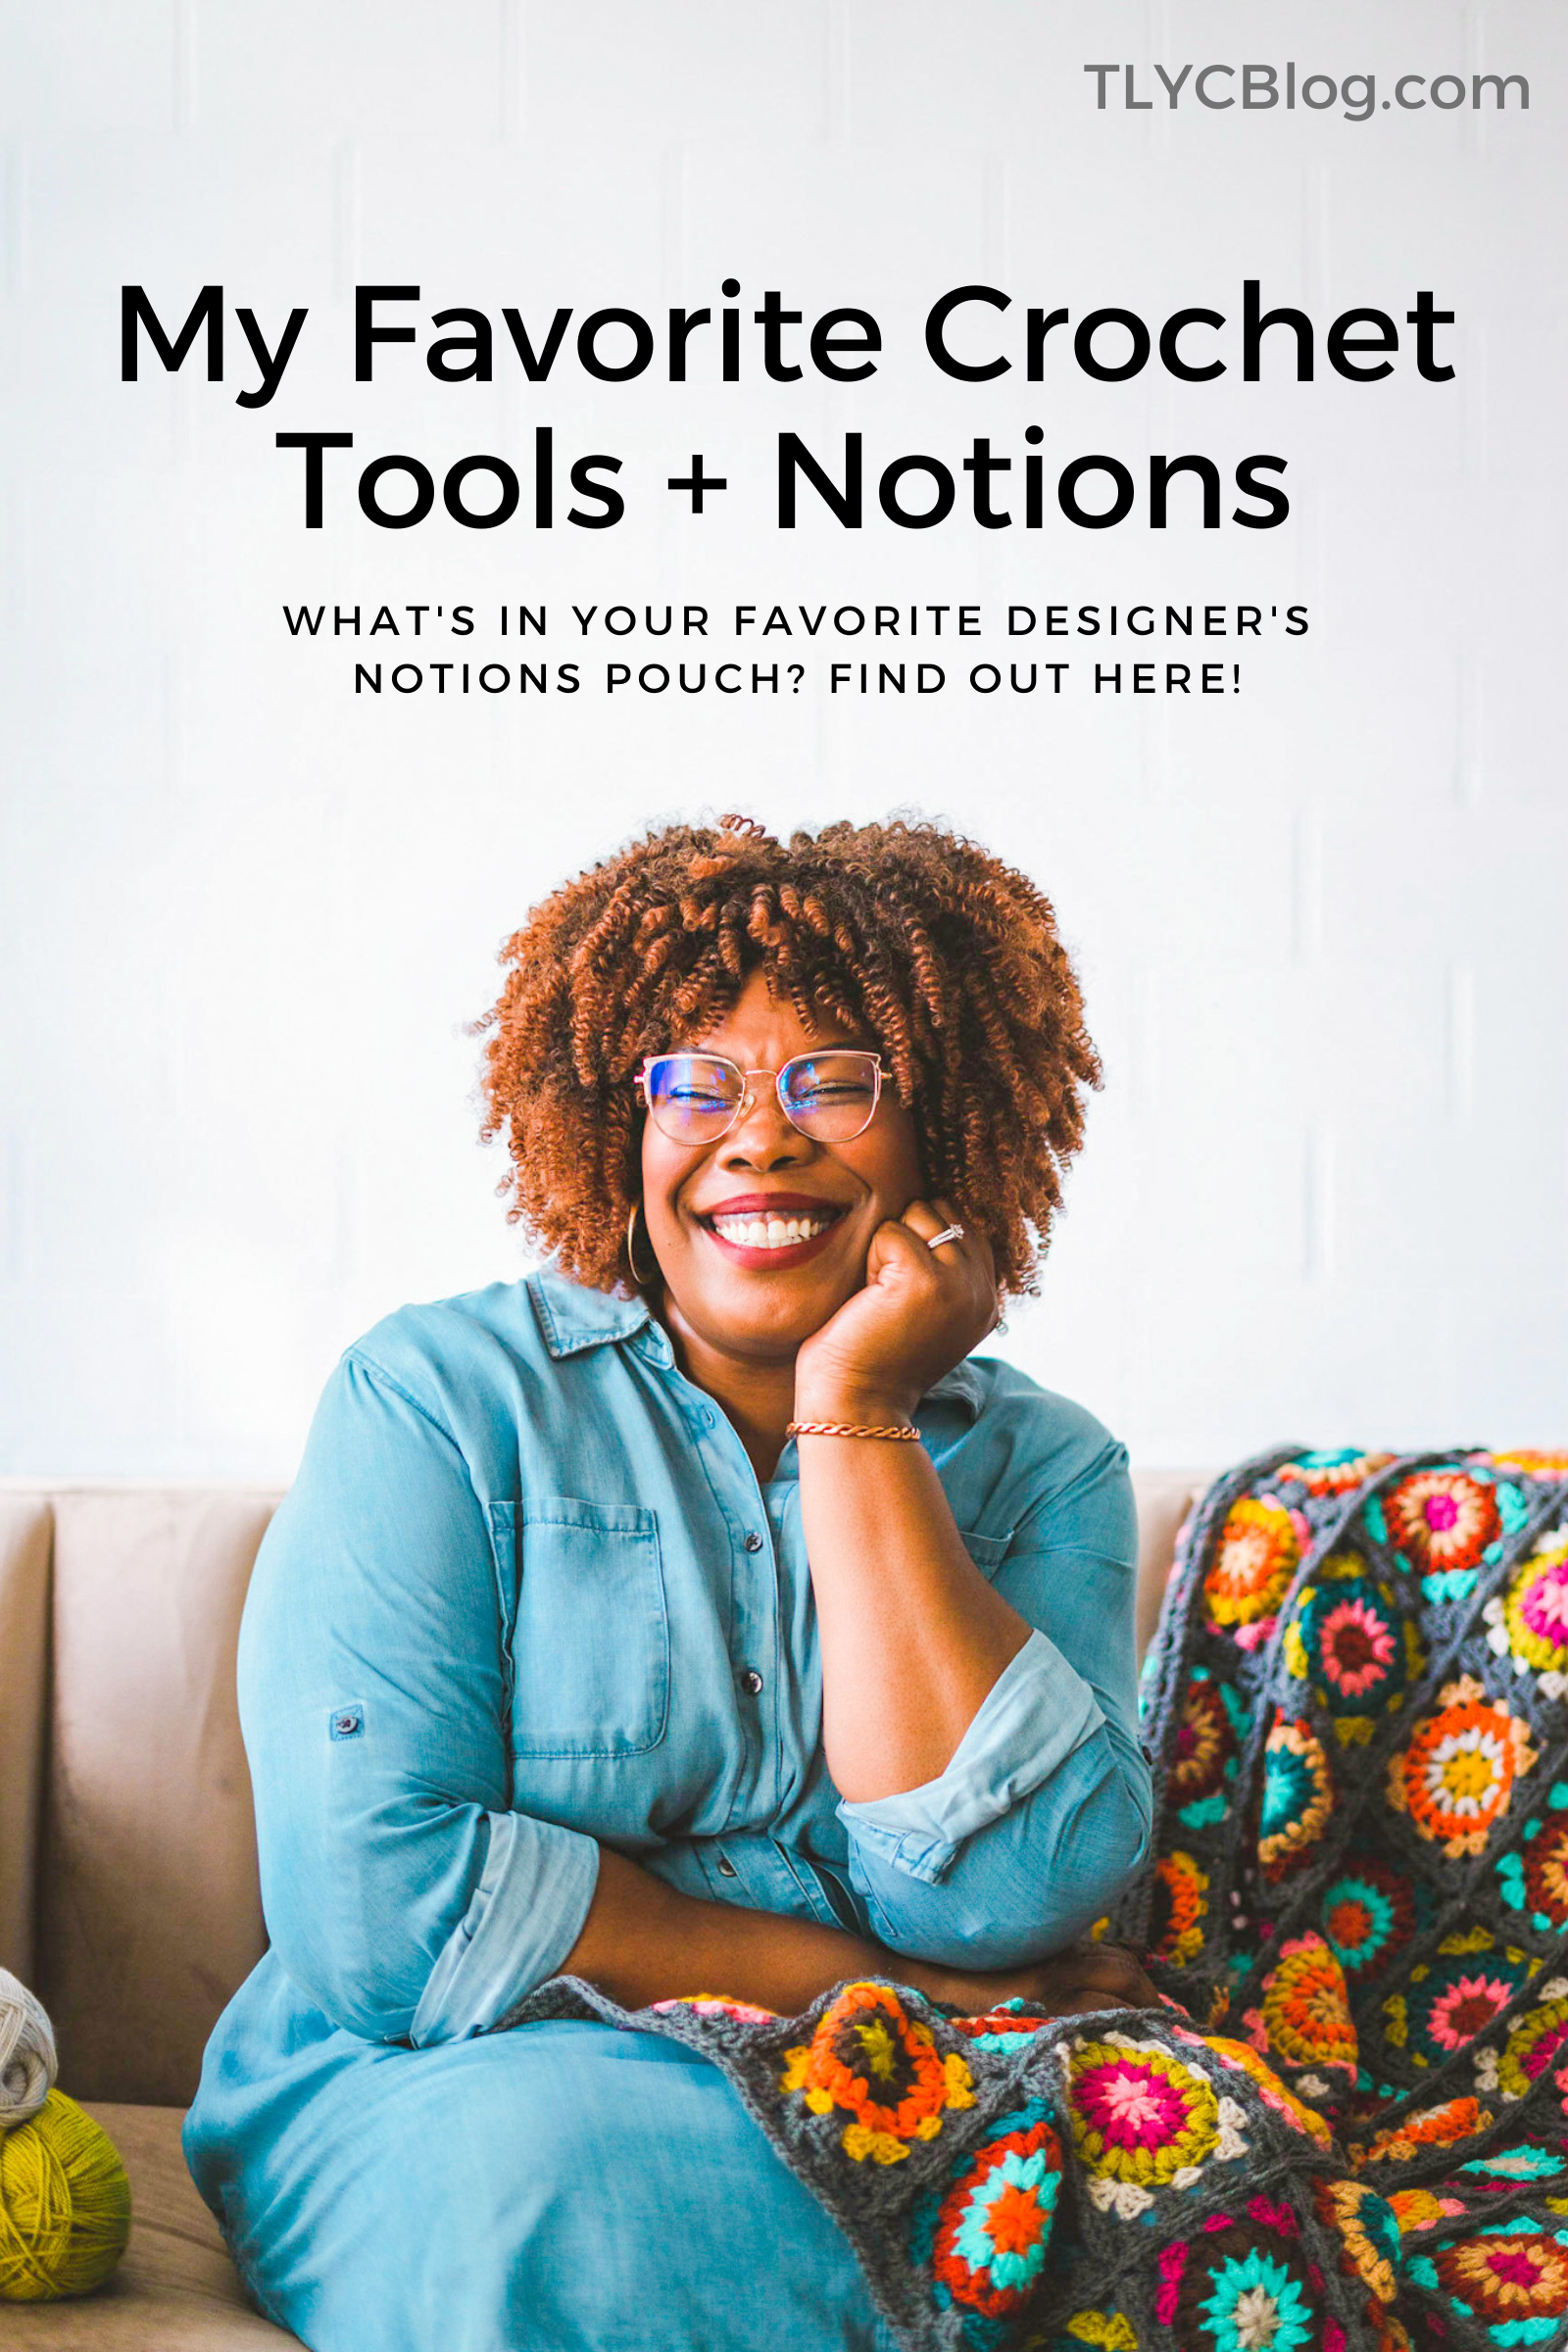 10 Must-Have Crochet Tools + Notions from a Pro Pattern Designer